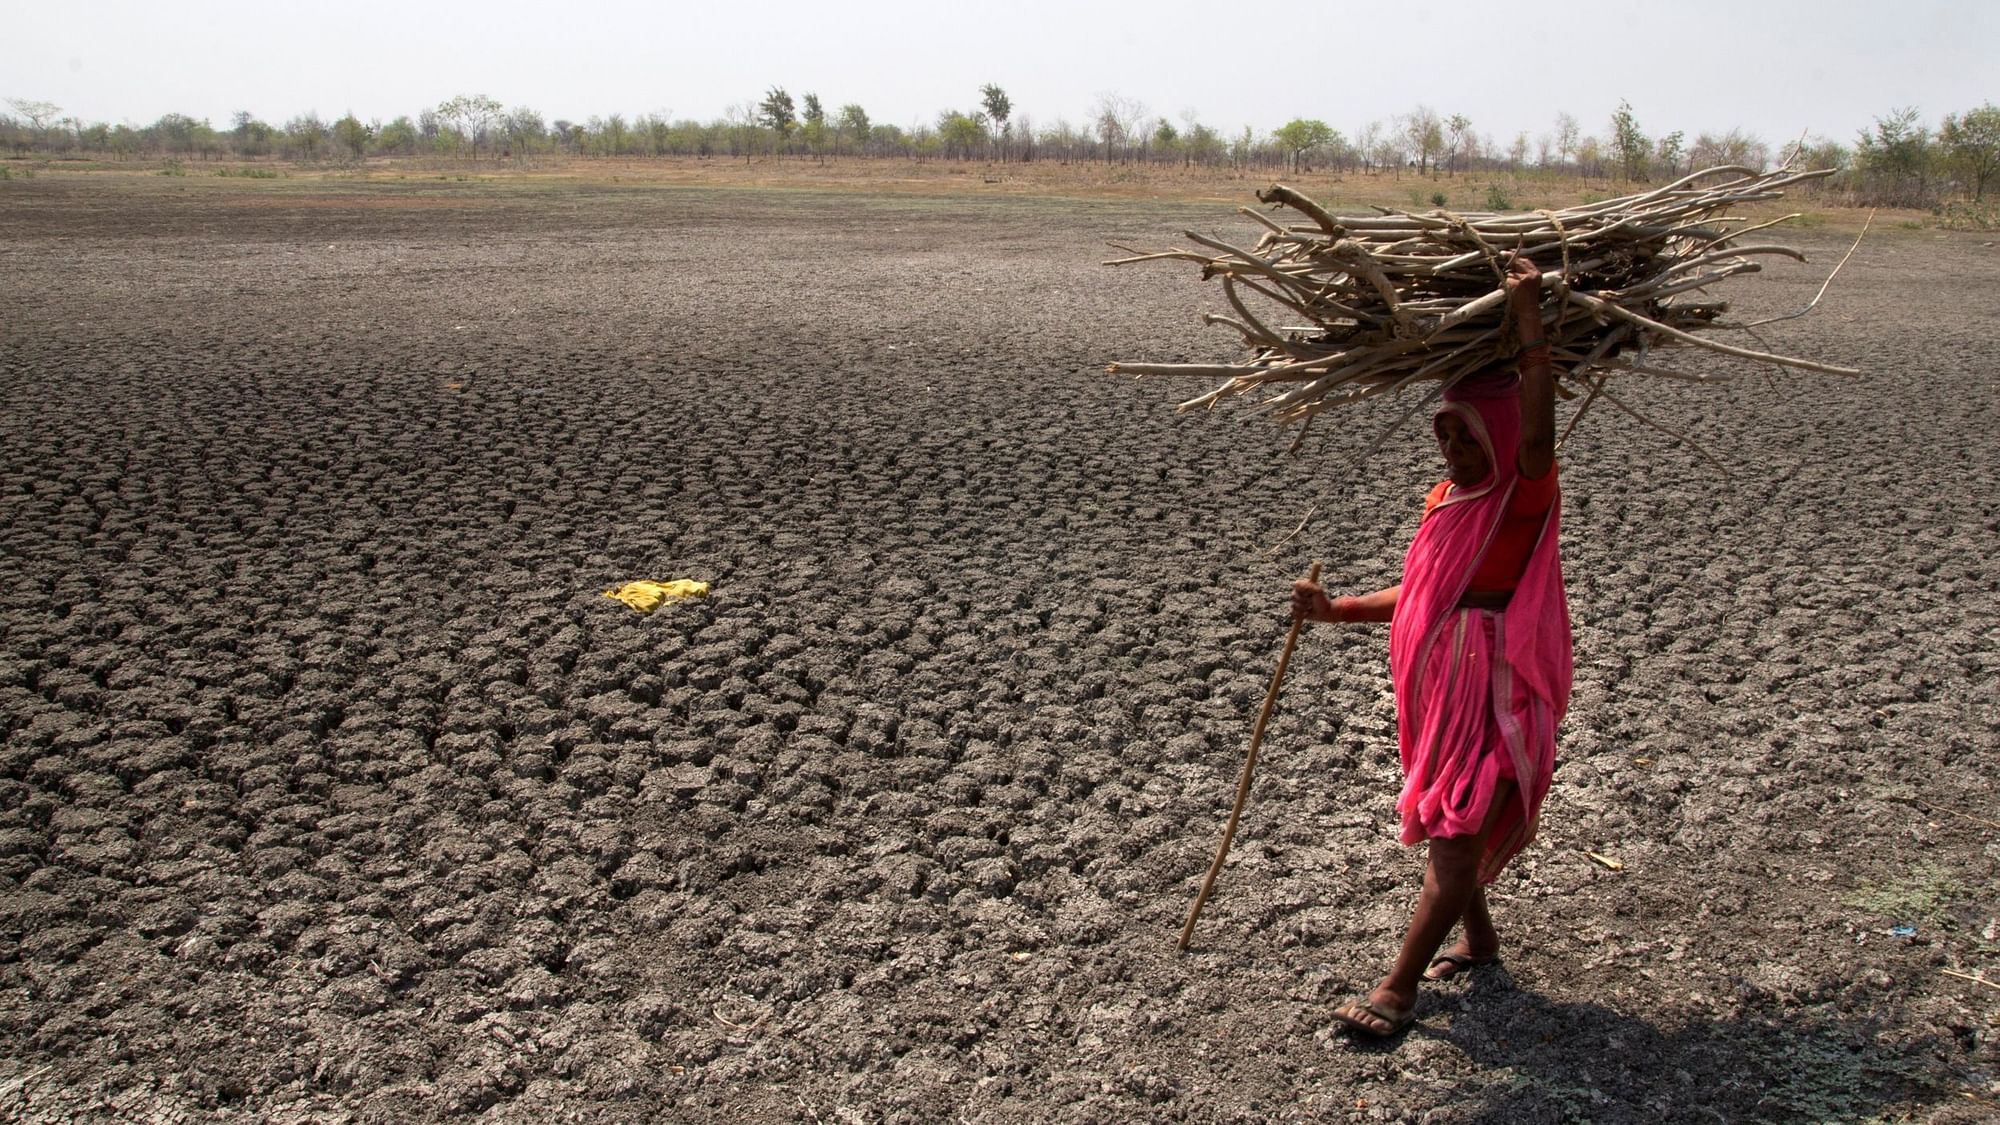 The Centre approved additional aid to eight states hit by drought, floods, landslides and cyclone last year.
Representational Image 